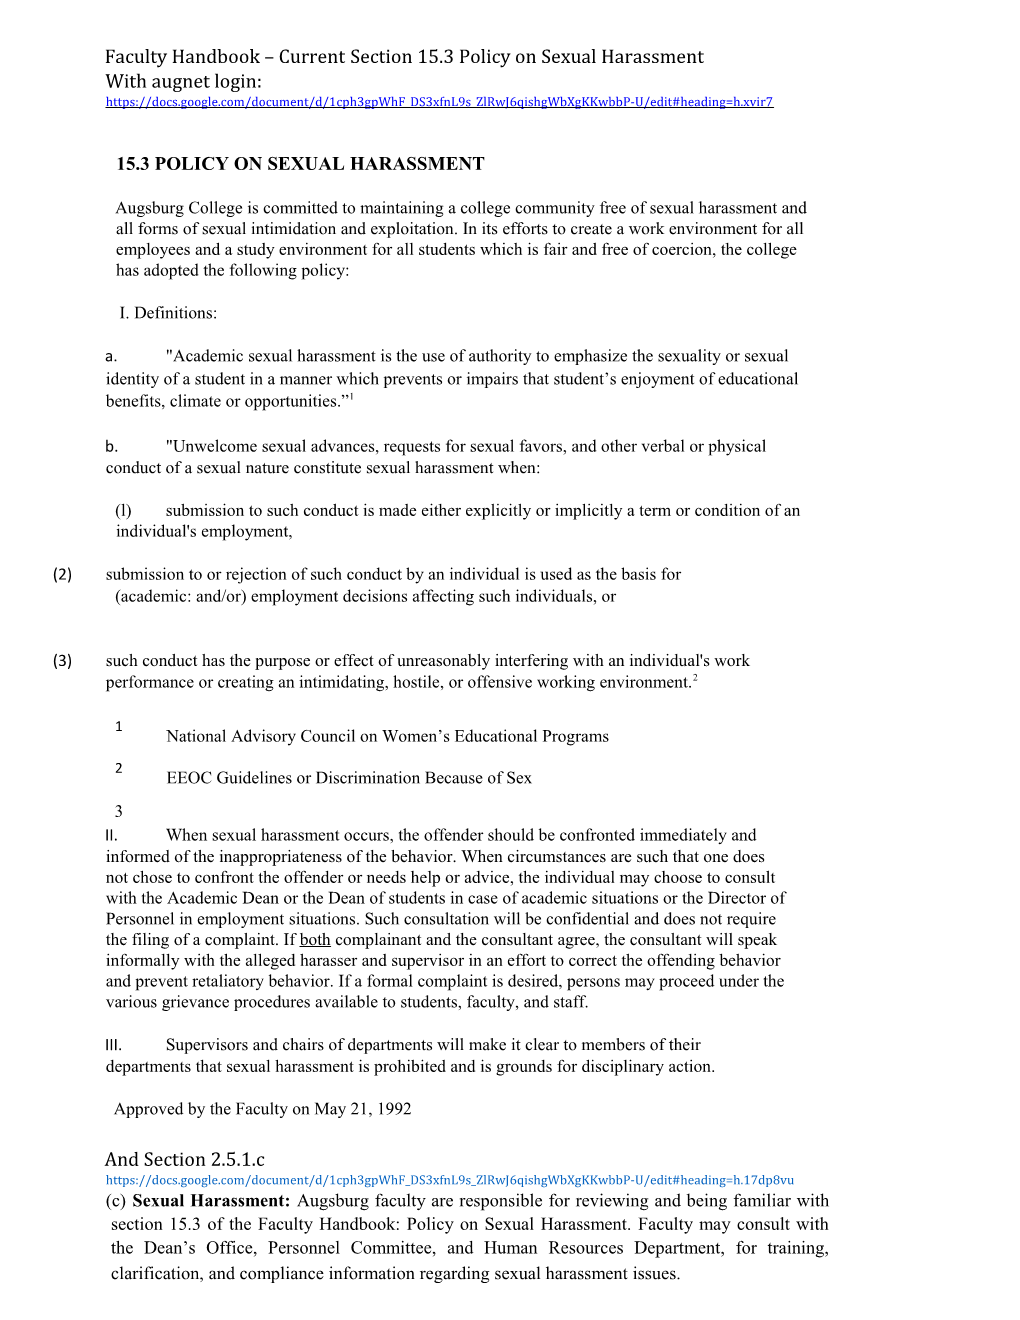 Faculty Handbook Currentsection 15.3 Policy on Sexual Harassment